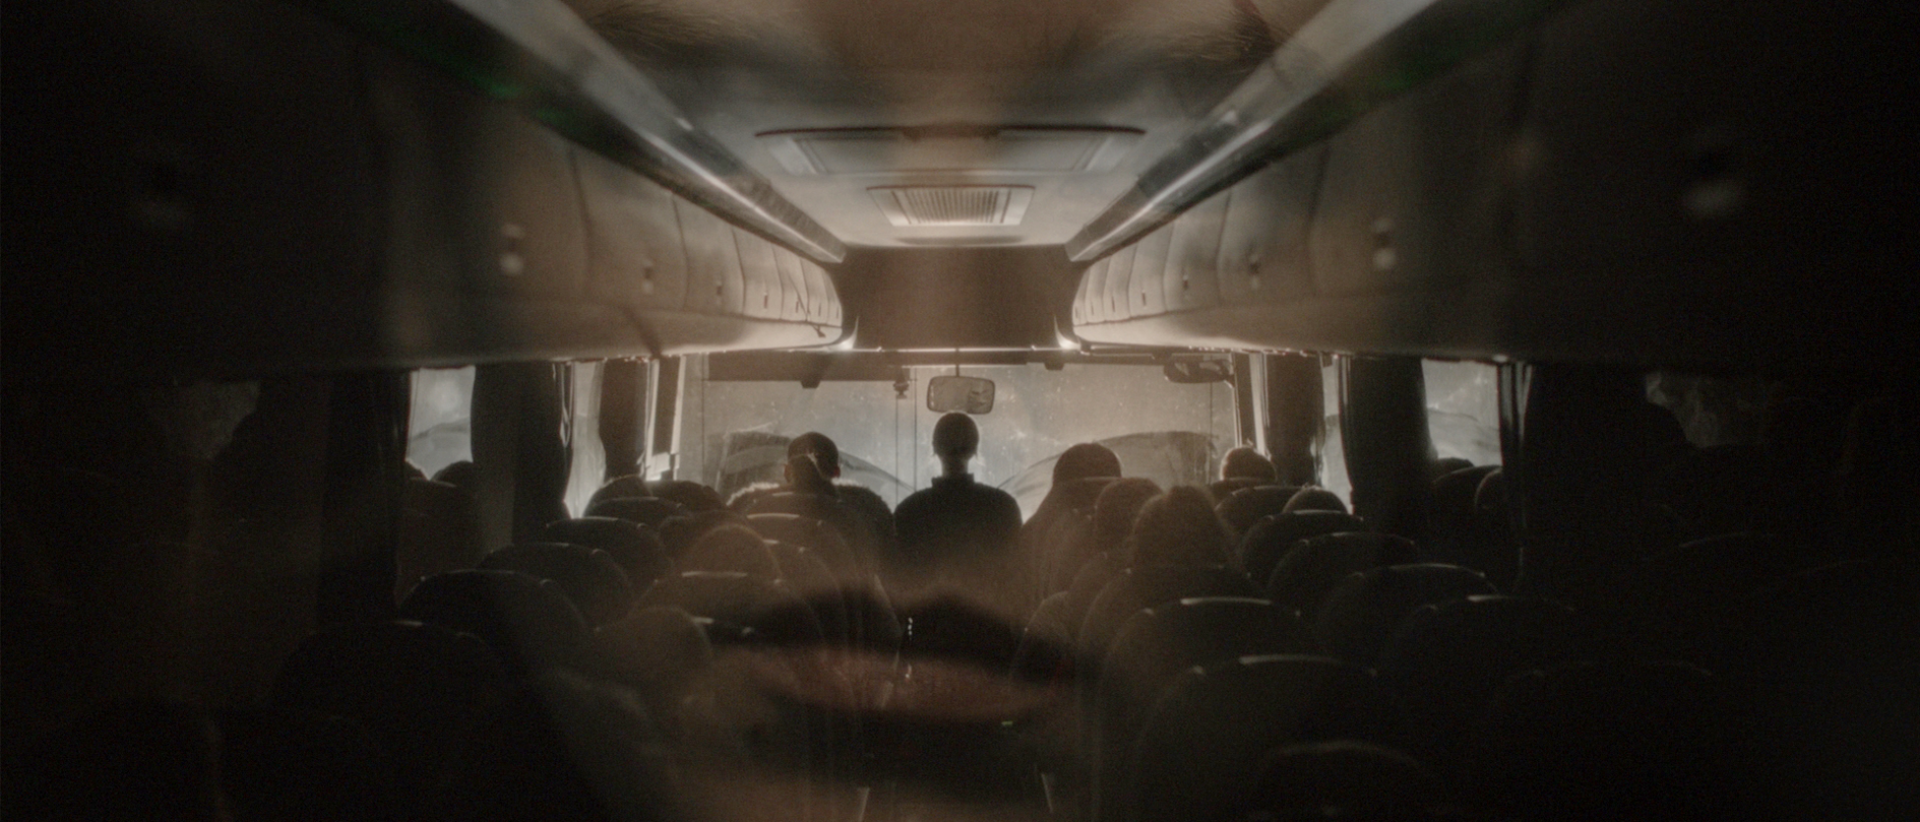 a persons face superimposed over the interior of a night bus